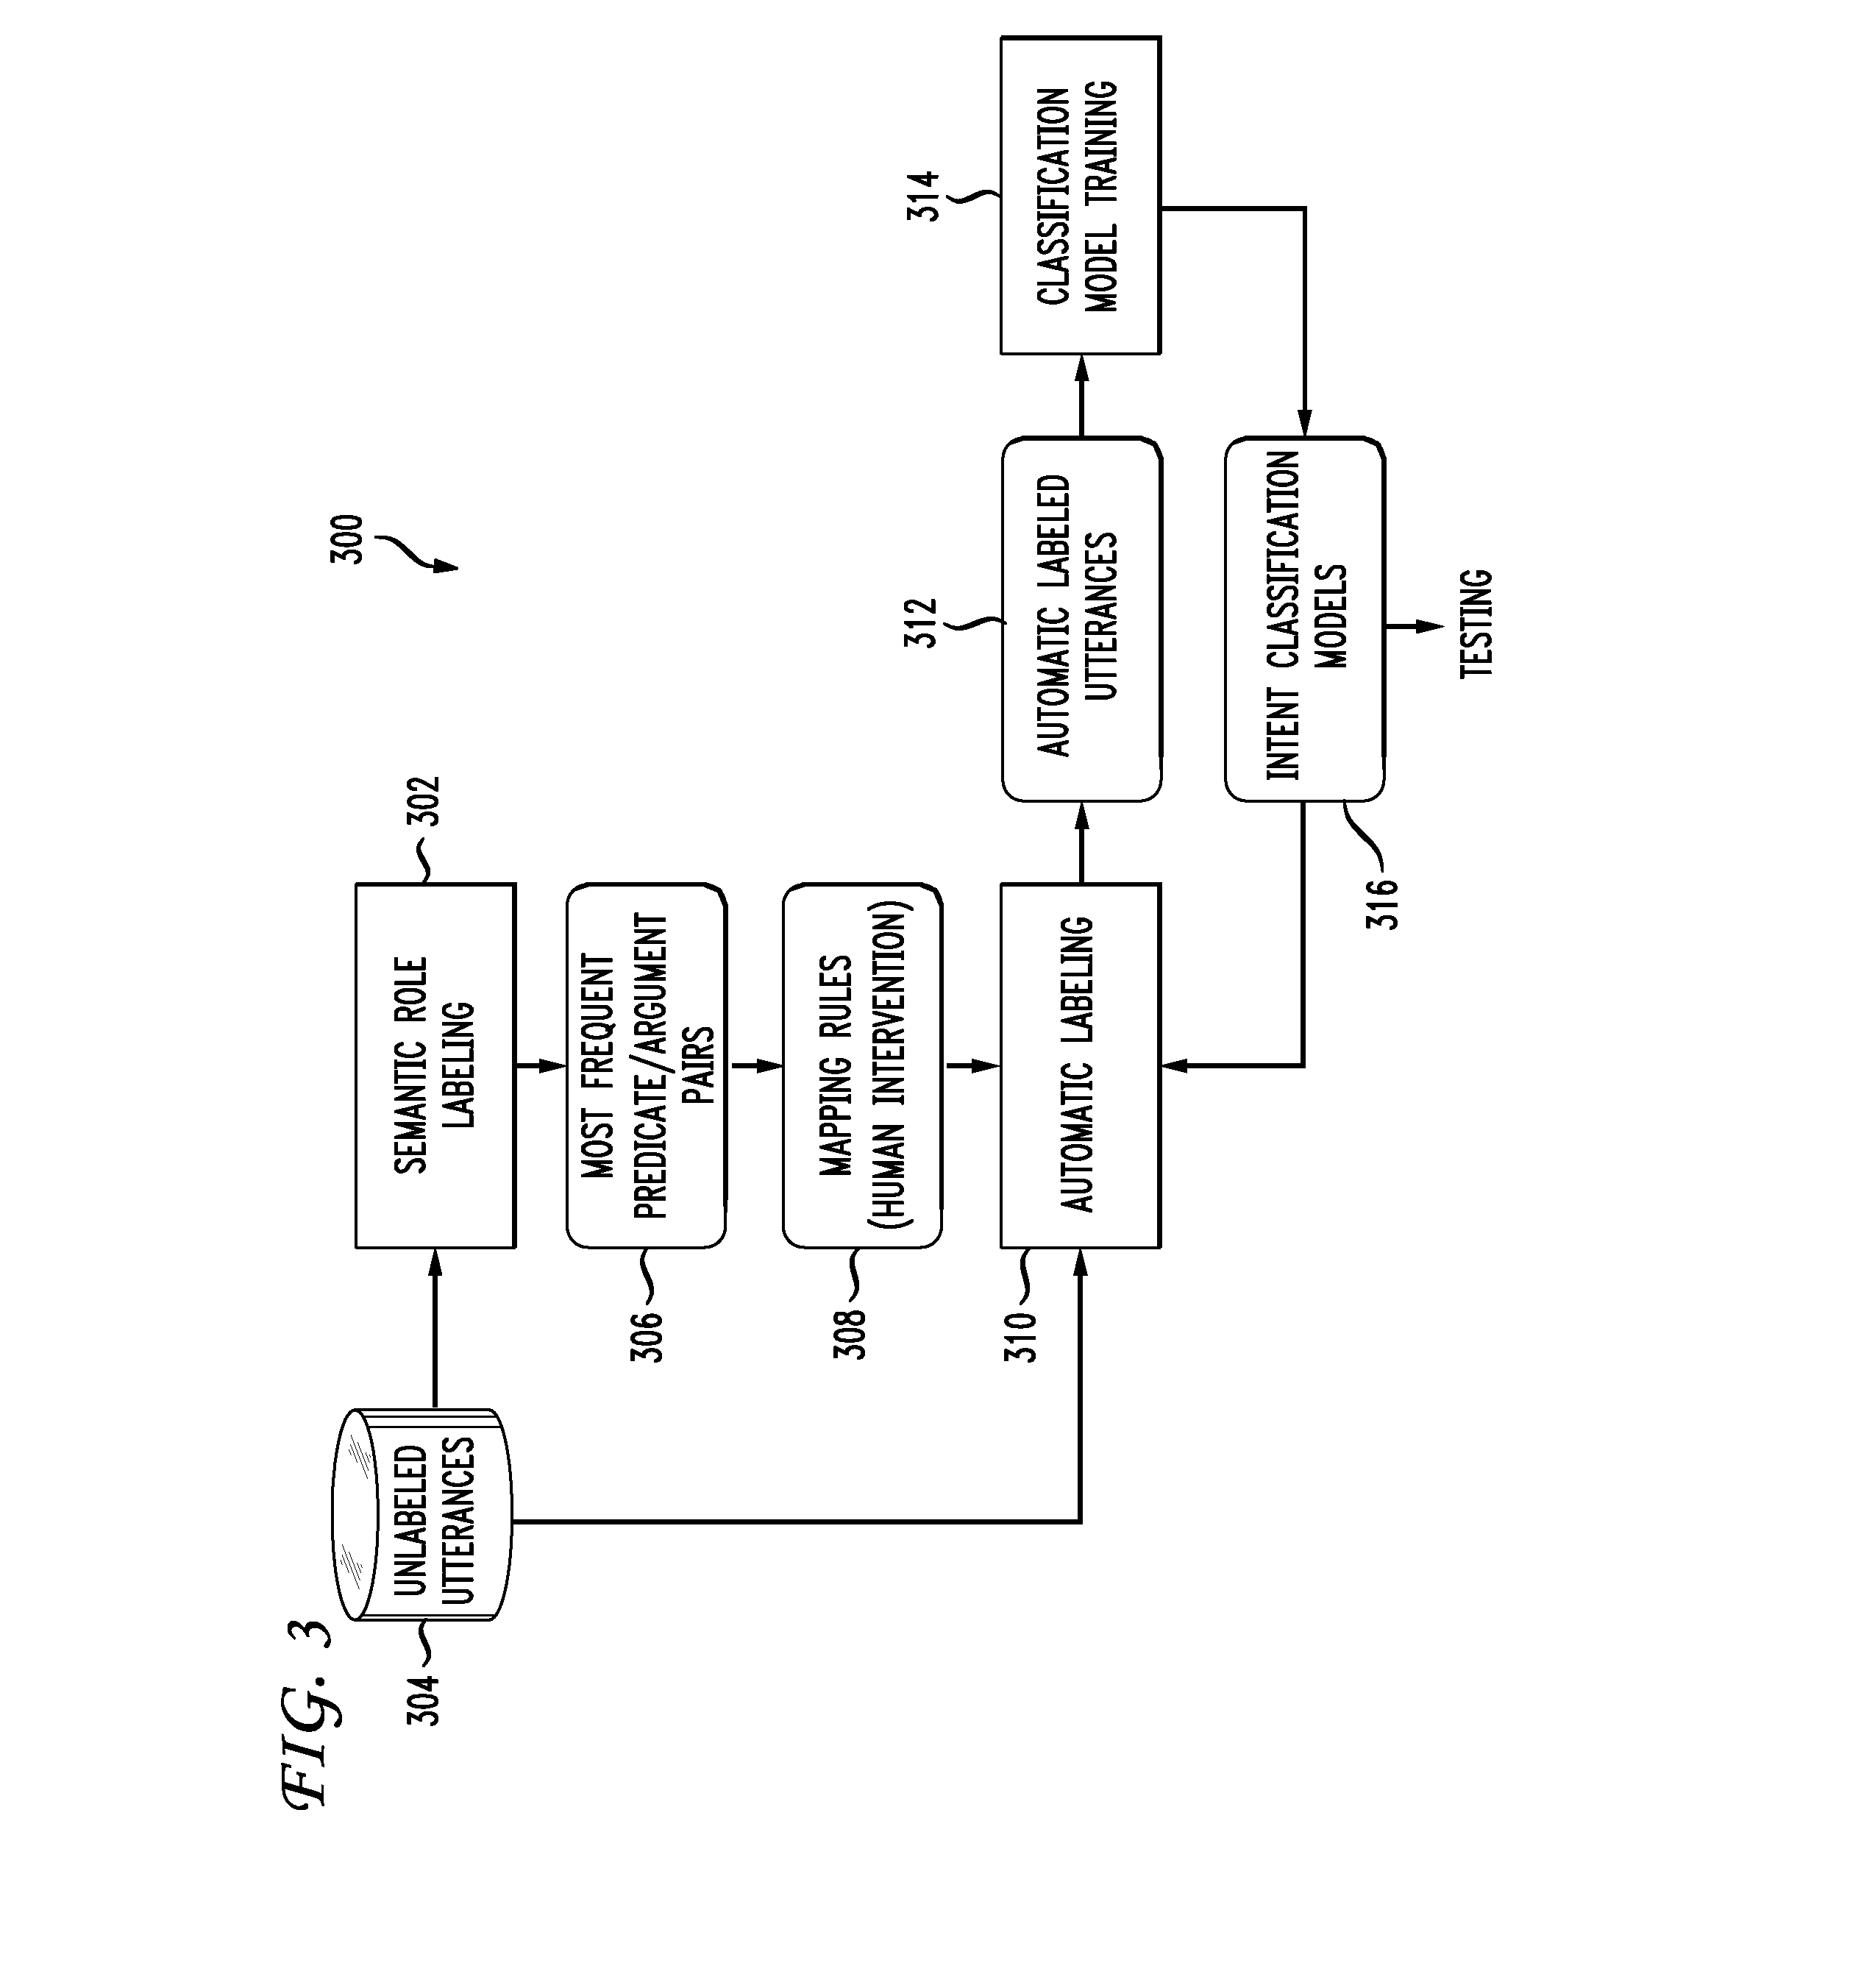 System and Method of Semi-Supervised Learning for Spoken Language Understanding Using Semantic Role Labeling